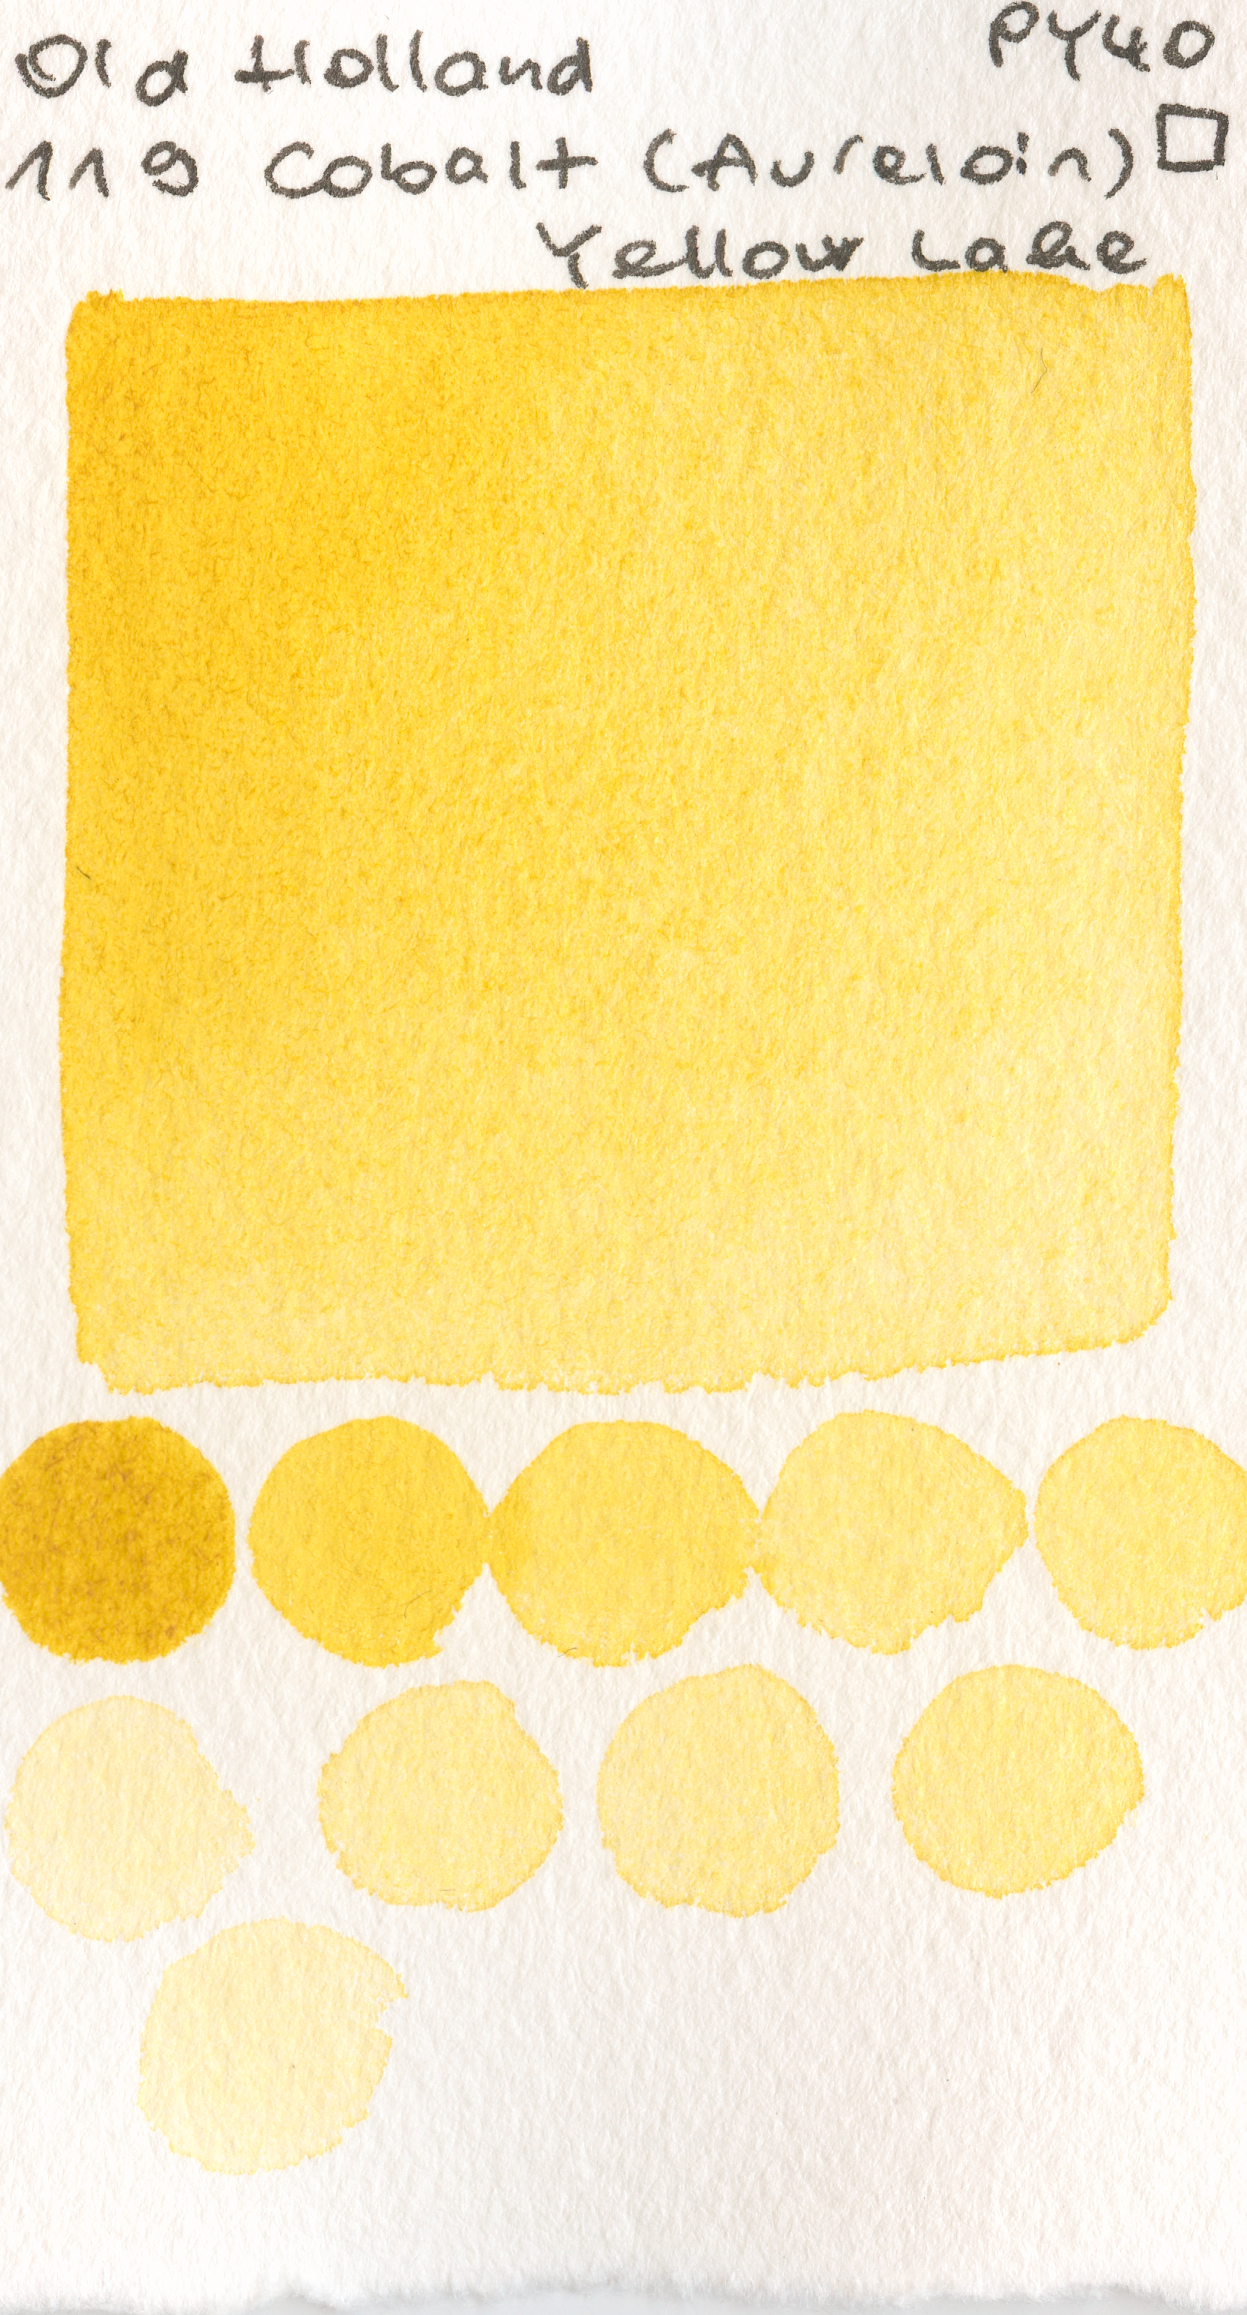 Old Holland Classic Watercolours 119 Cobalt (Aureolin) Yellow Lake PY40 watercolor swatch